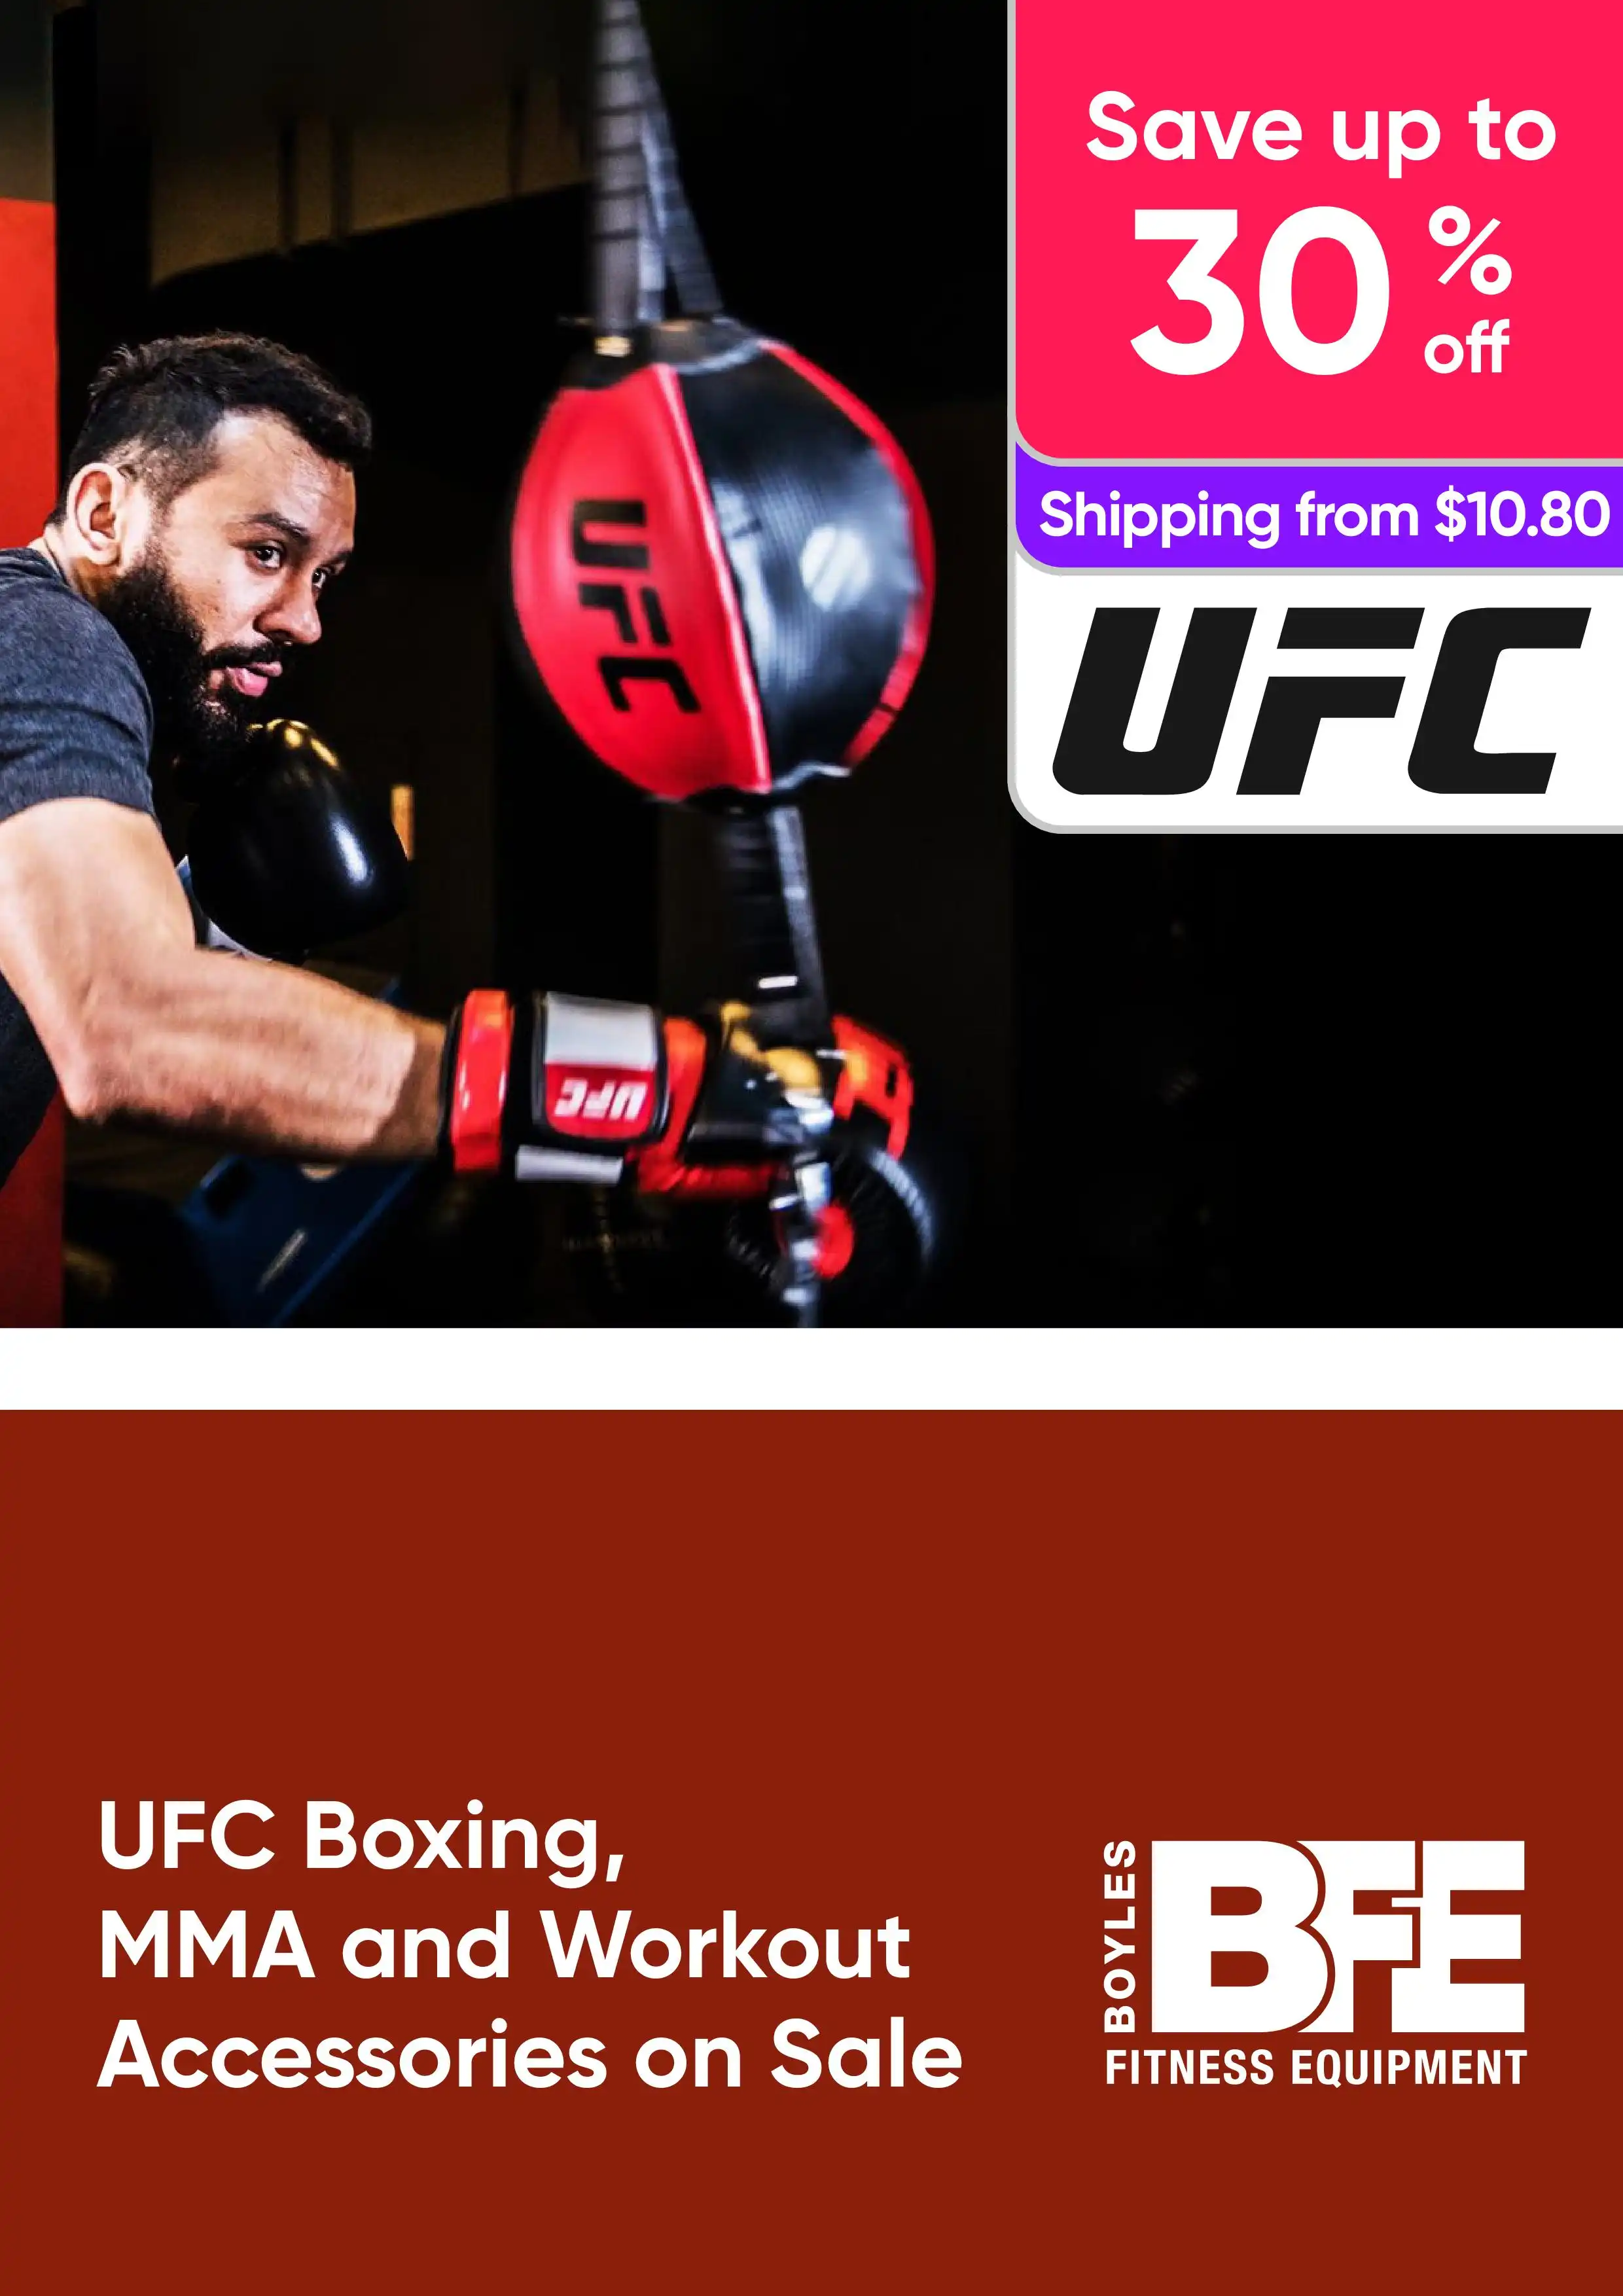 UFC Boxing, MMA and Workout Accessories on Sale Up to 30% Off